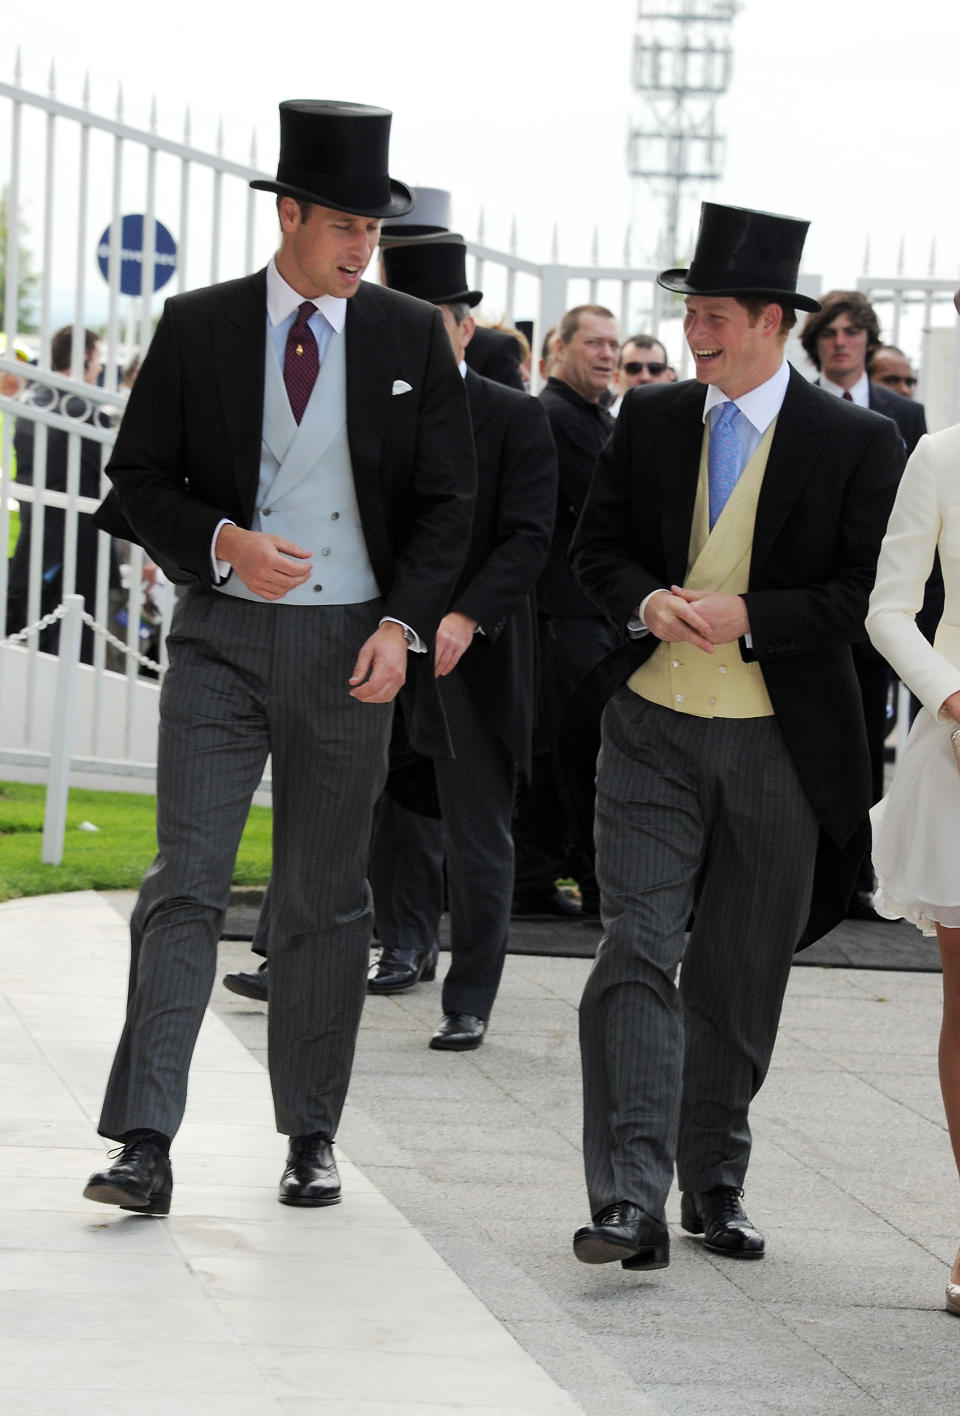 Prince William, Duke of Cambridge (L) and Prince Harry attend Investec Derby Day at the Investec Derby Festival at Epsom Downs Racecourse on June 4, 2011 in Epsom, England.